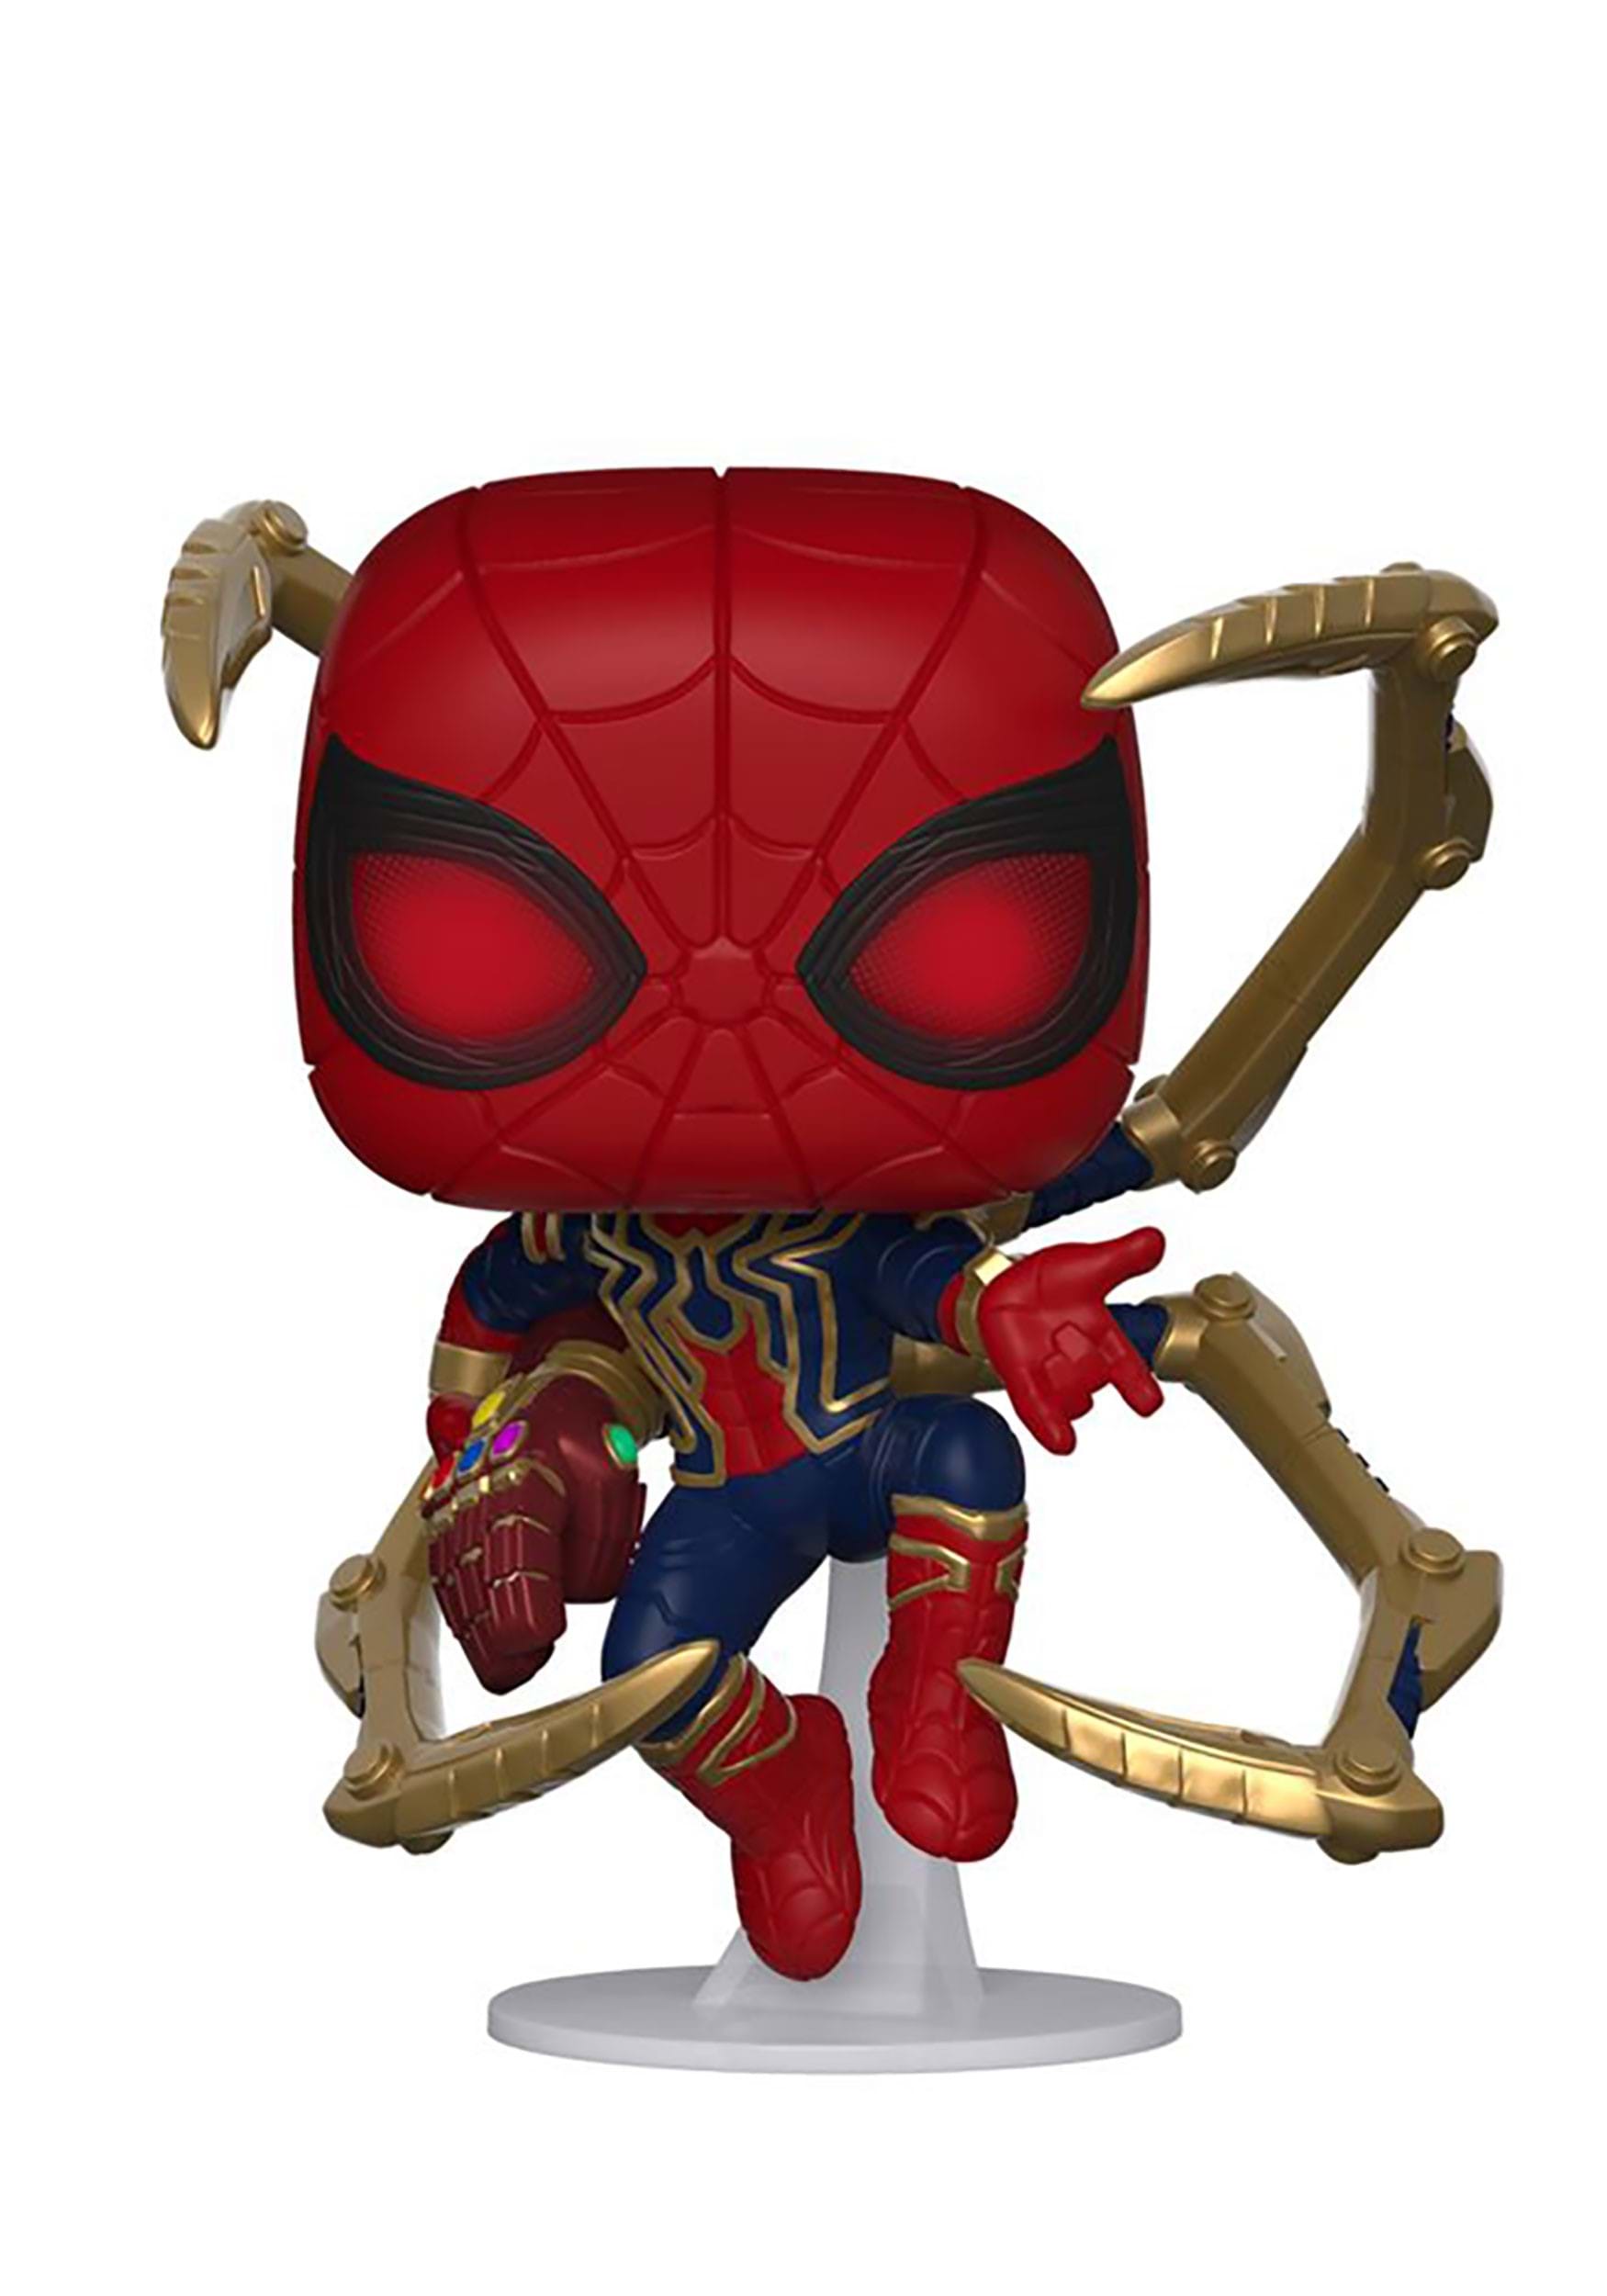  Funko Pop Marvel: Holiday - Spider-Man with Ugly Sweater  Collectible Figure, Multicolor : Toys & Games